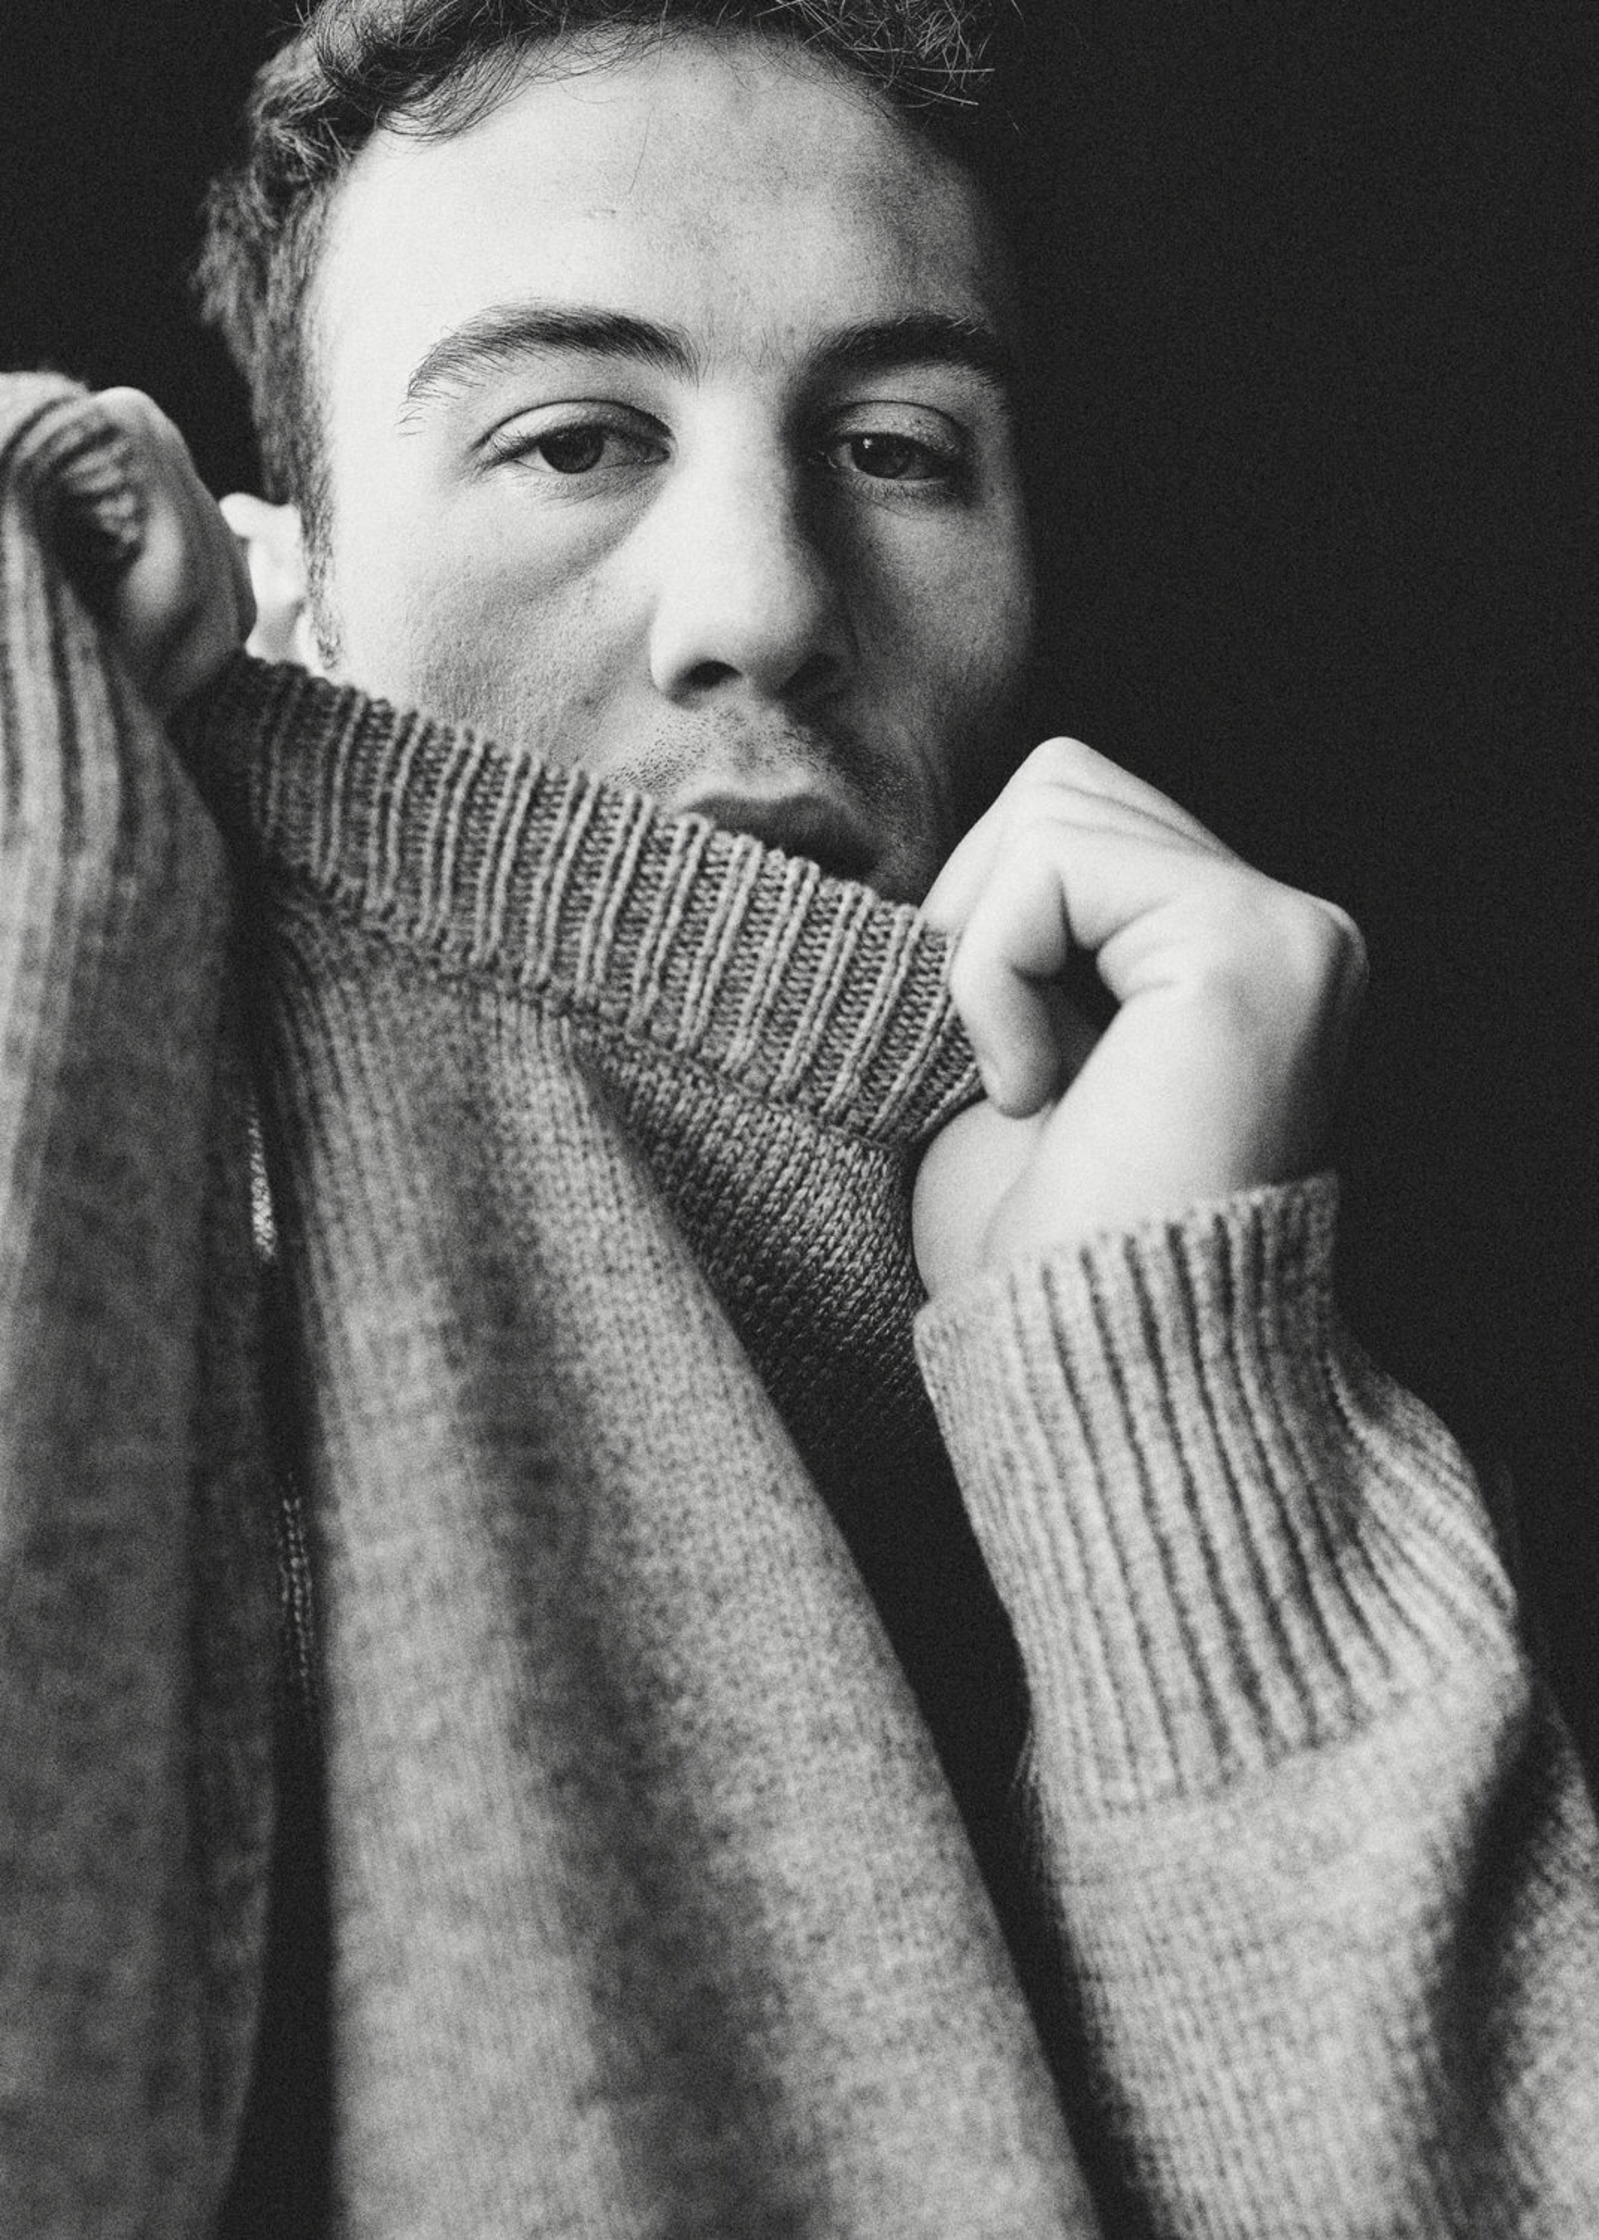 a black and white photo of a man wearing a sweater